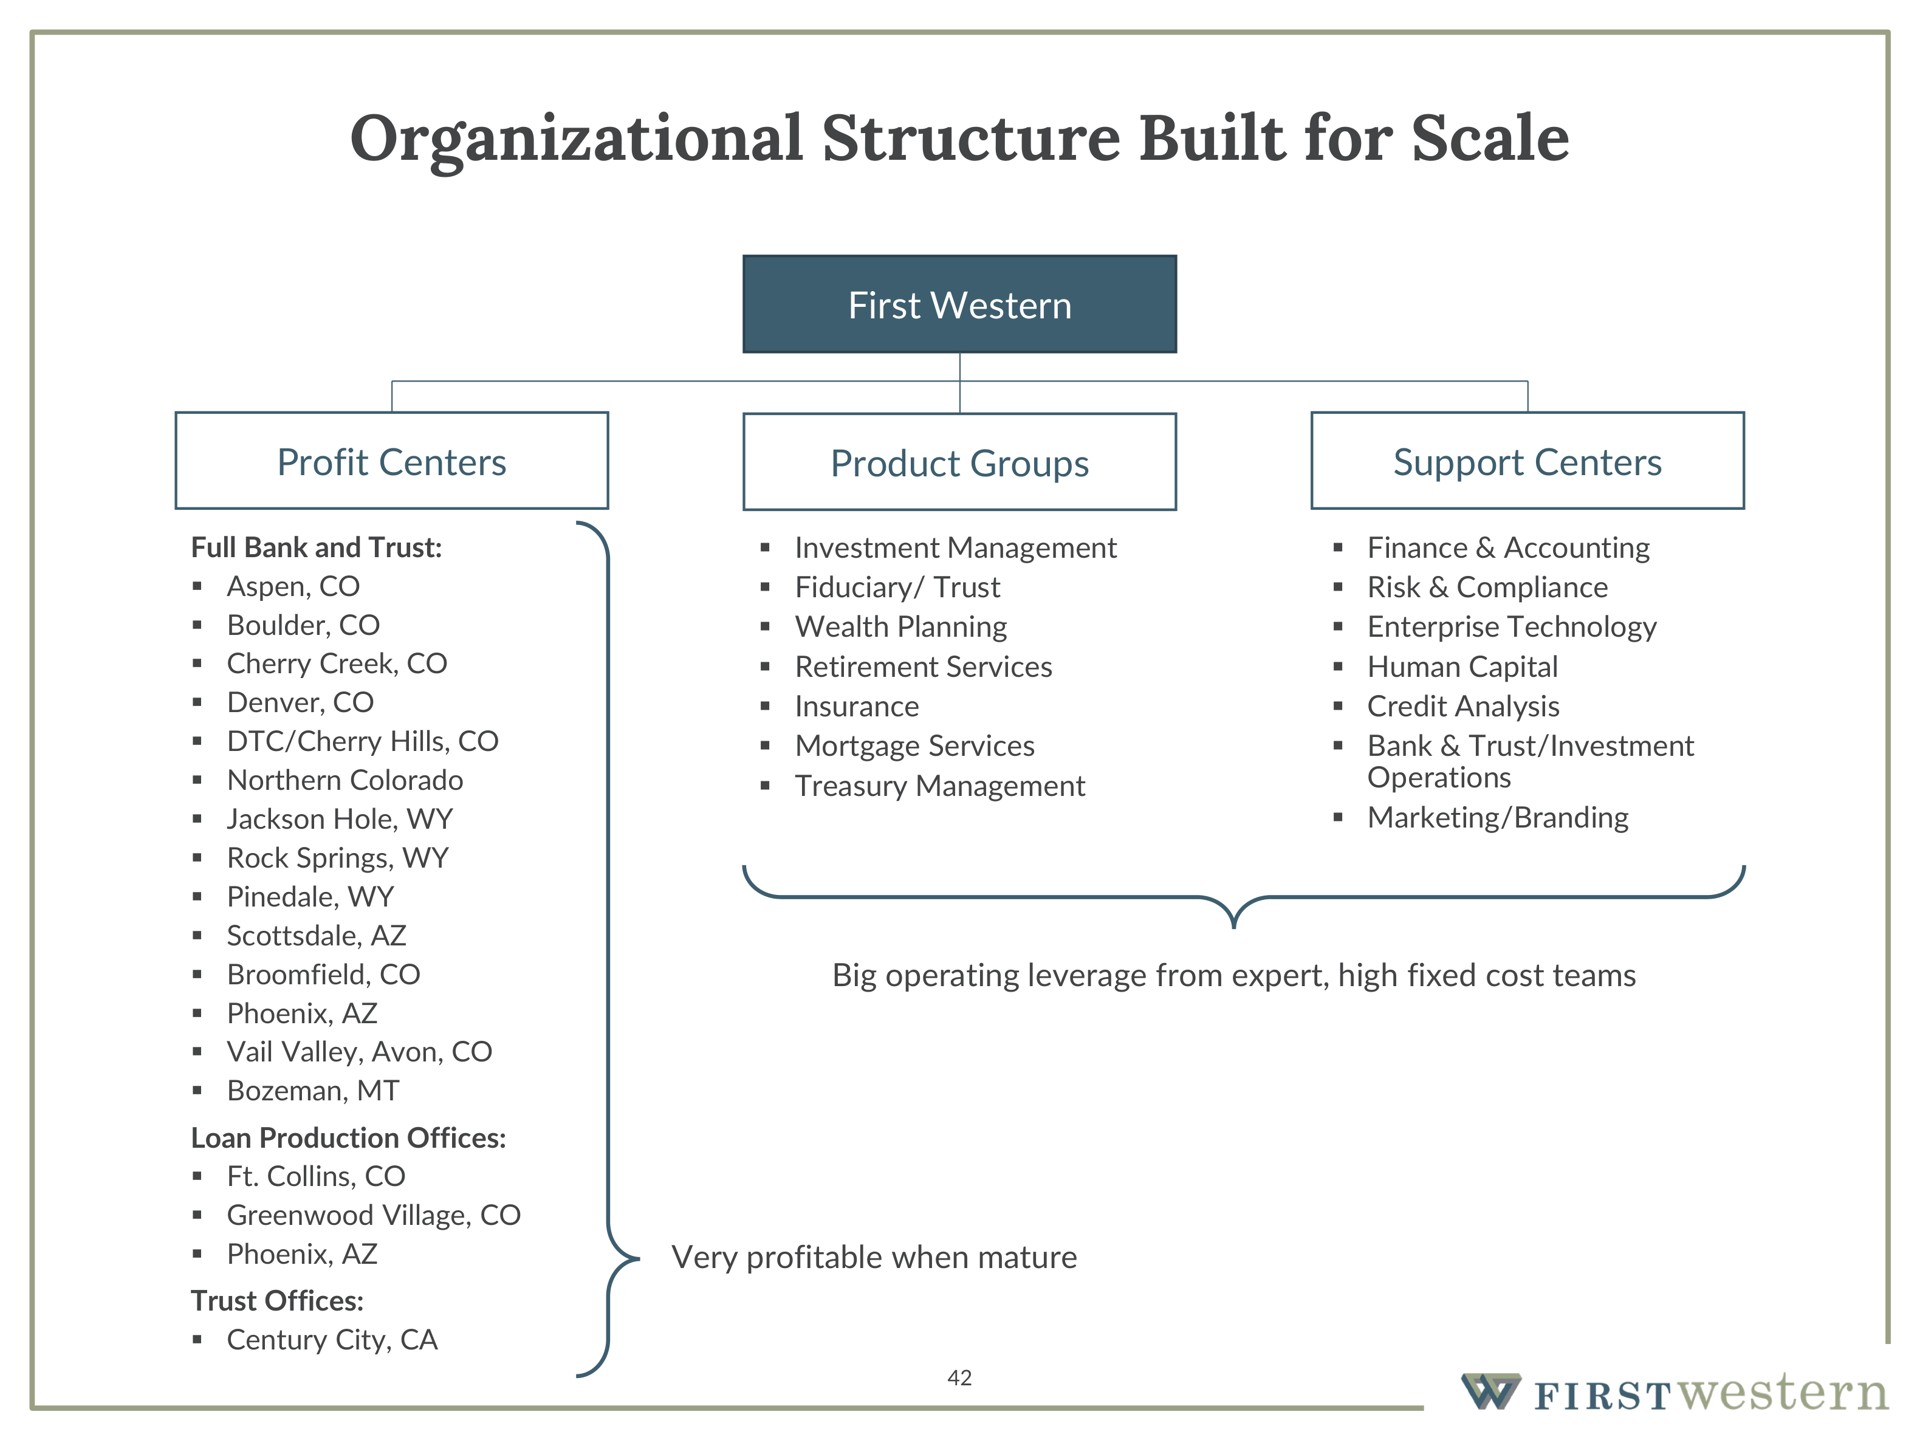 organizational structure built for scale | First Western Financial